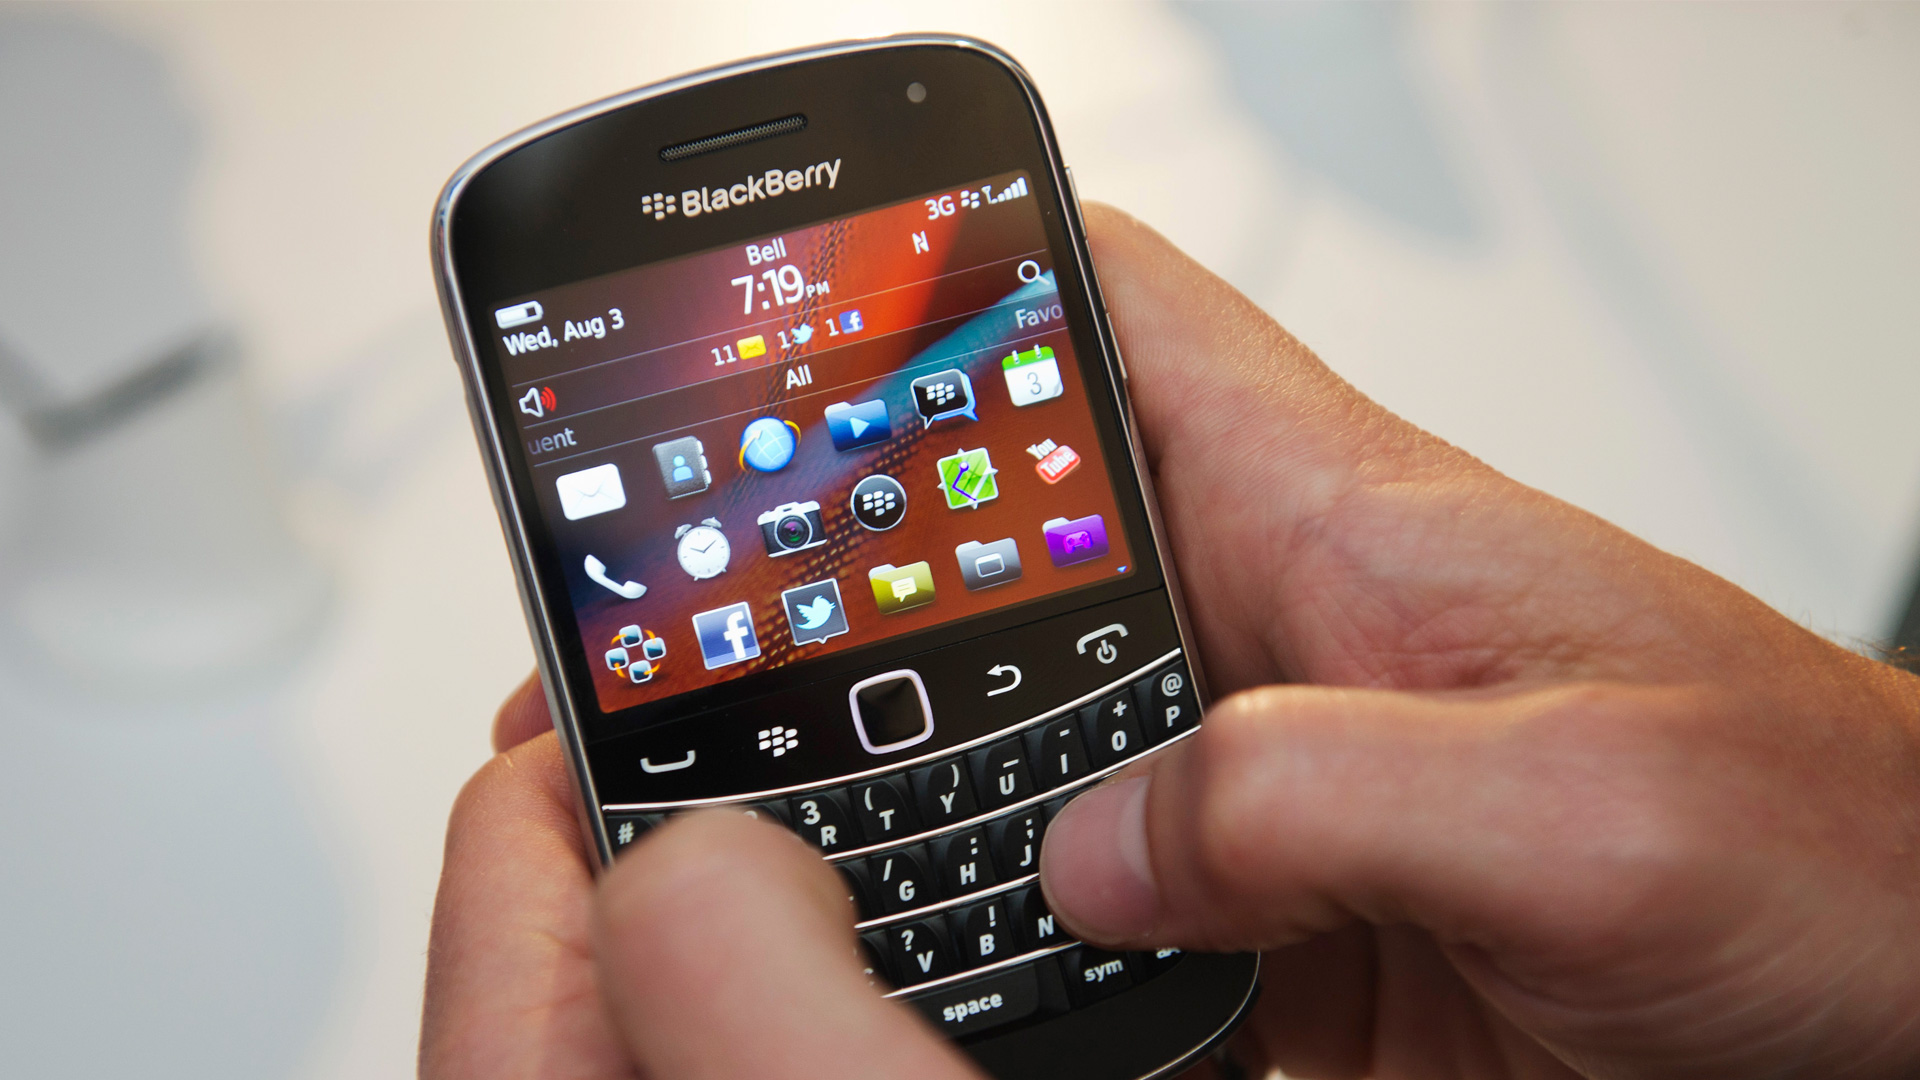 BlackBerry ends support for all its classic smartphones - 9to5Mac